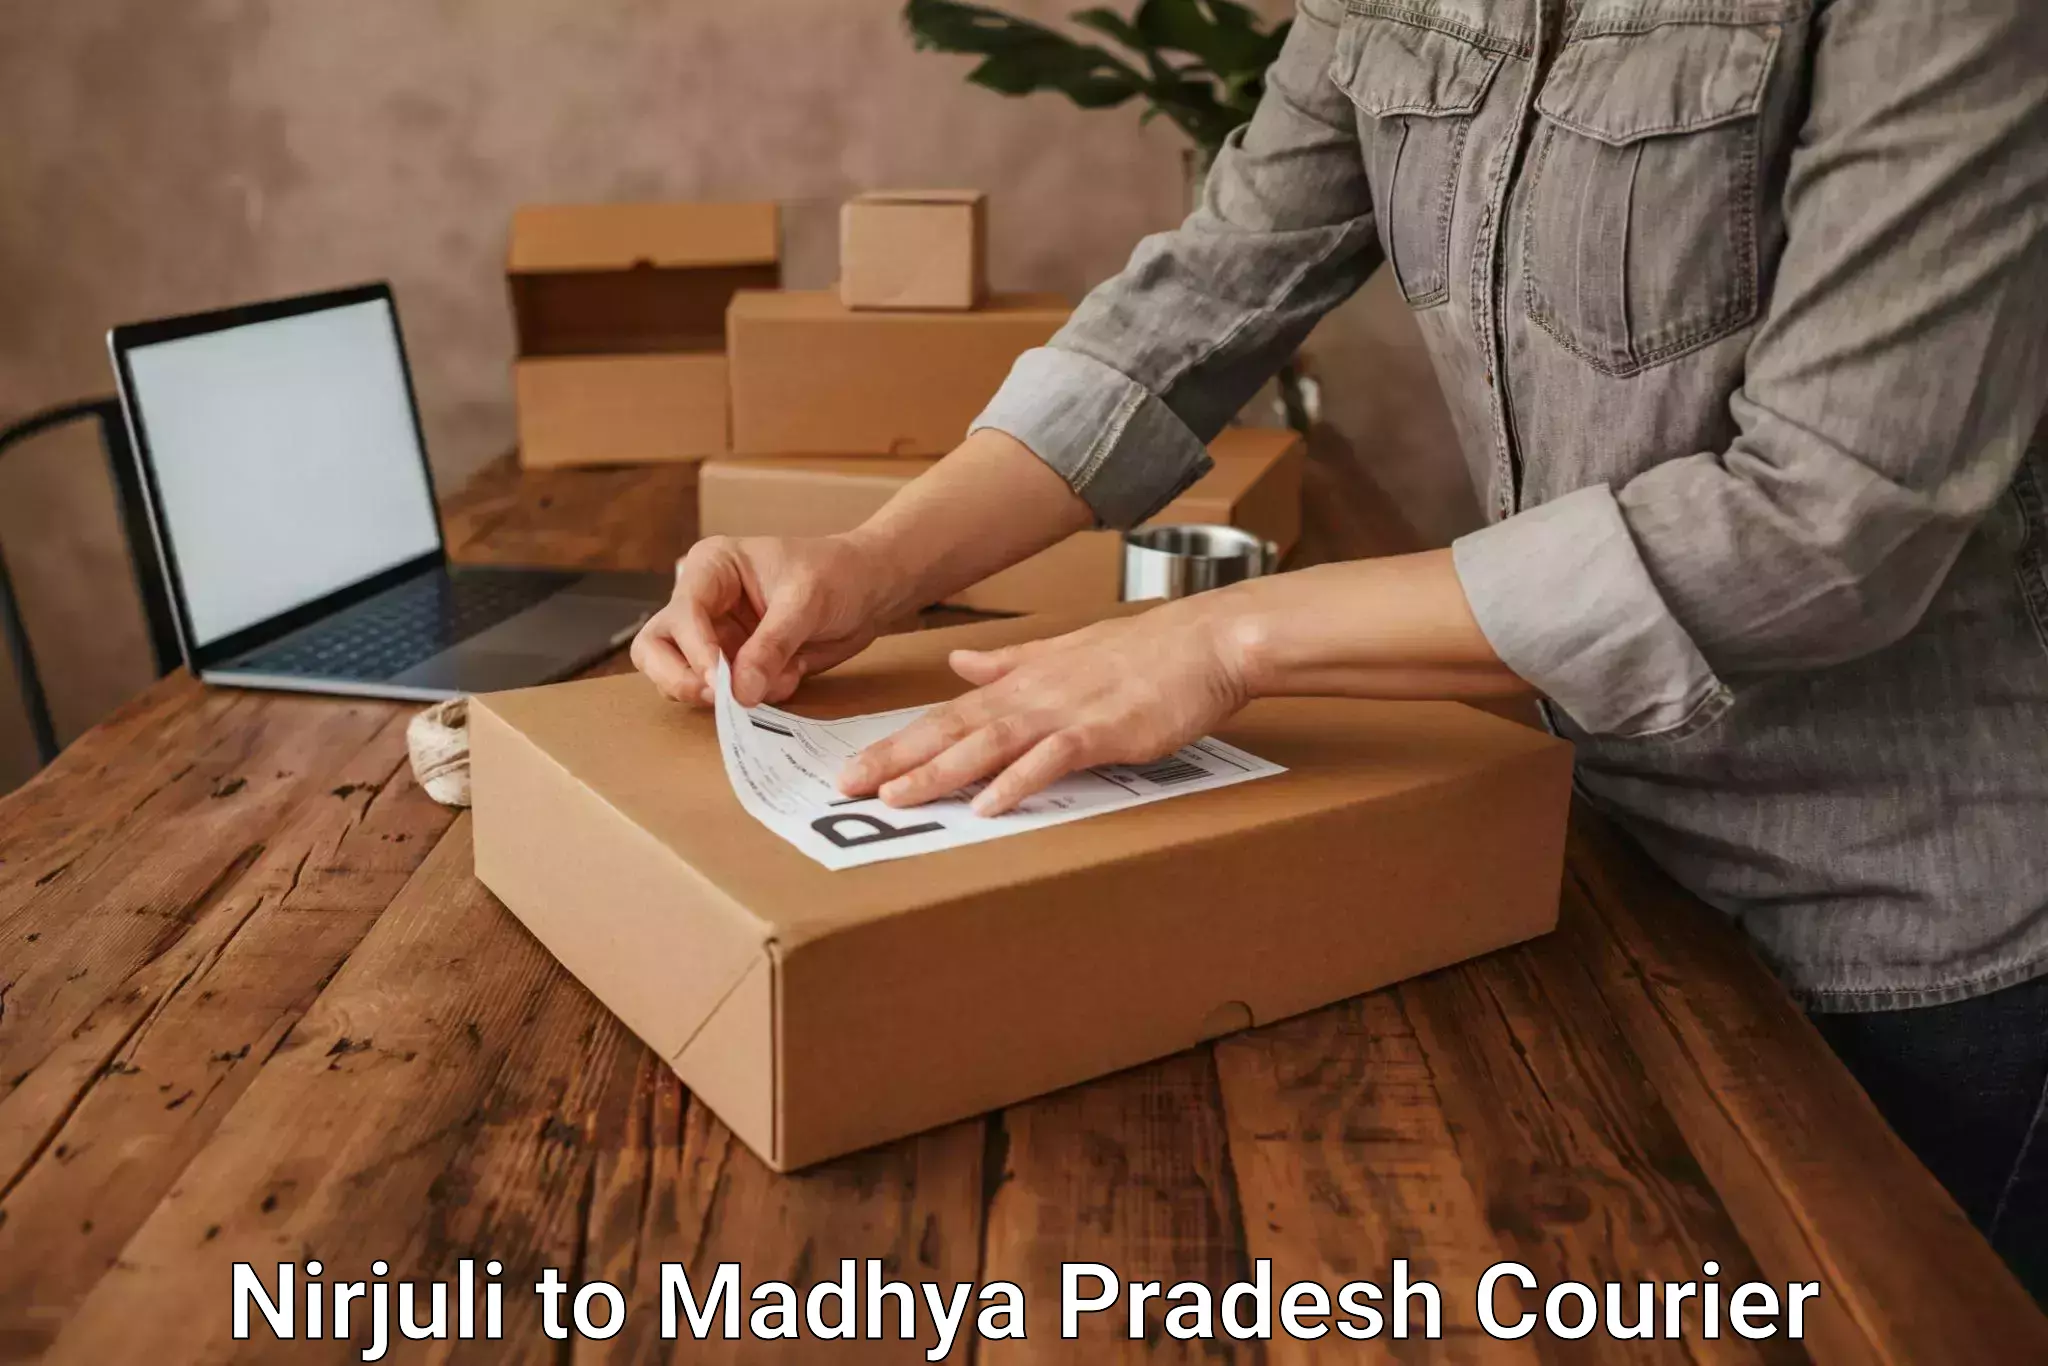 Courier service partnerships Nirjuli to IIT Indore